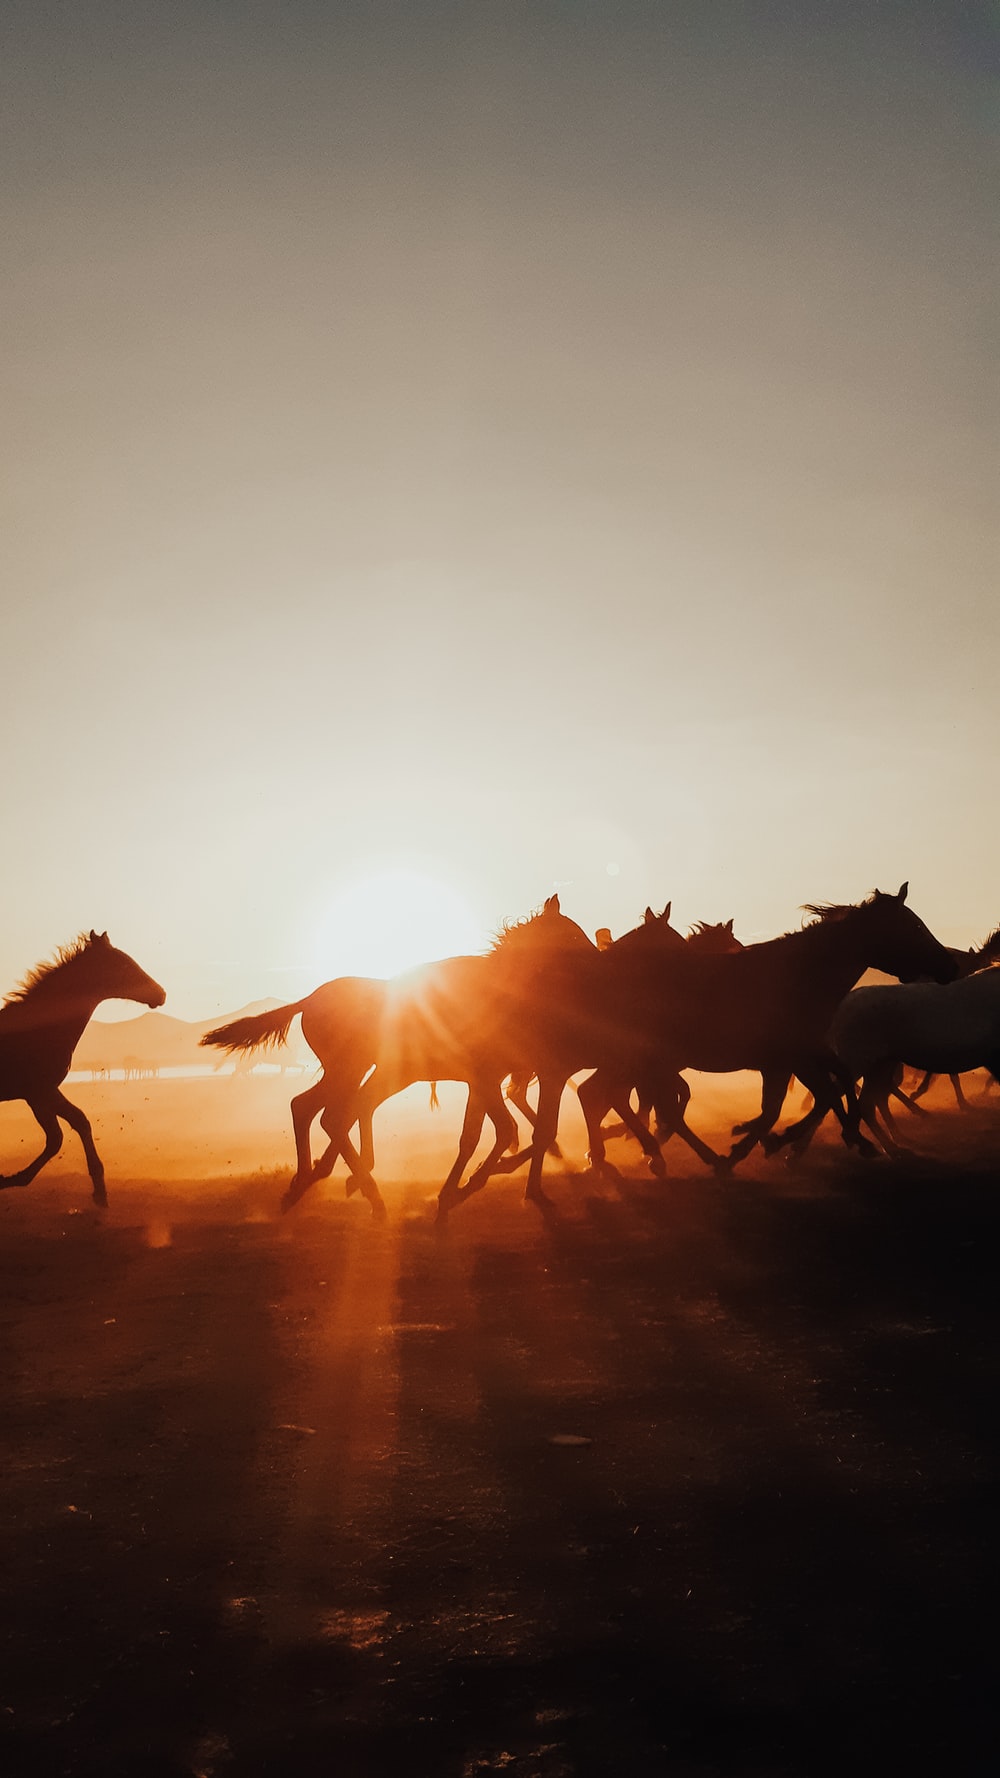 Horse Herd Picture. Download Free Image